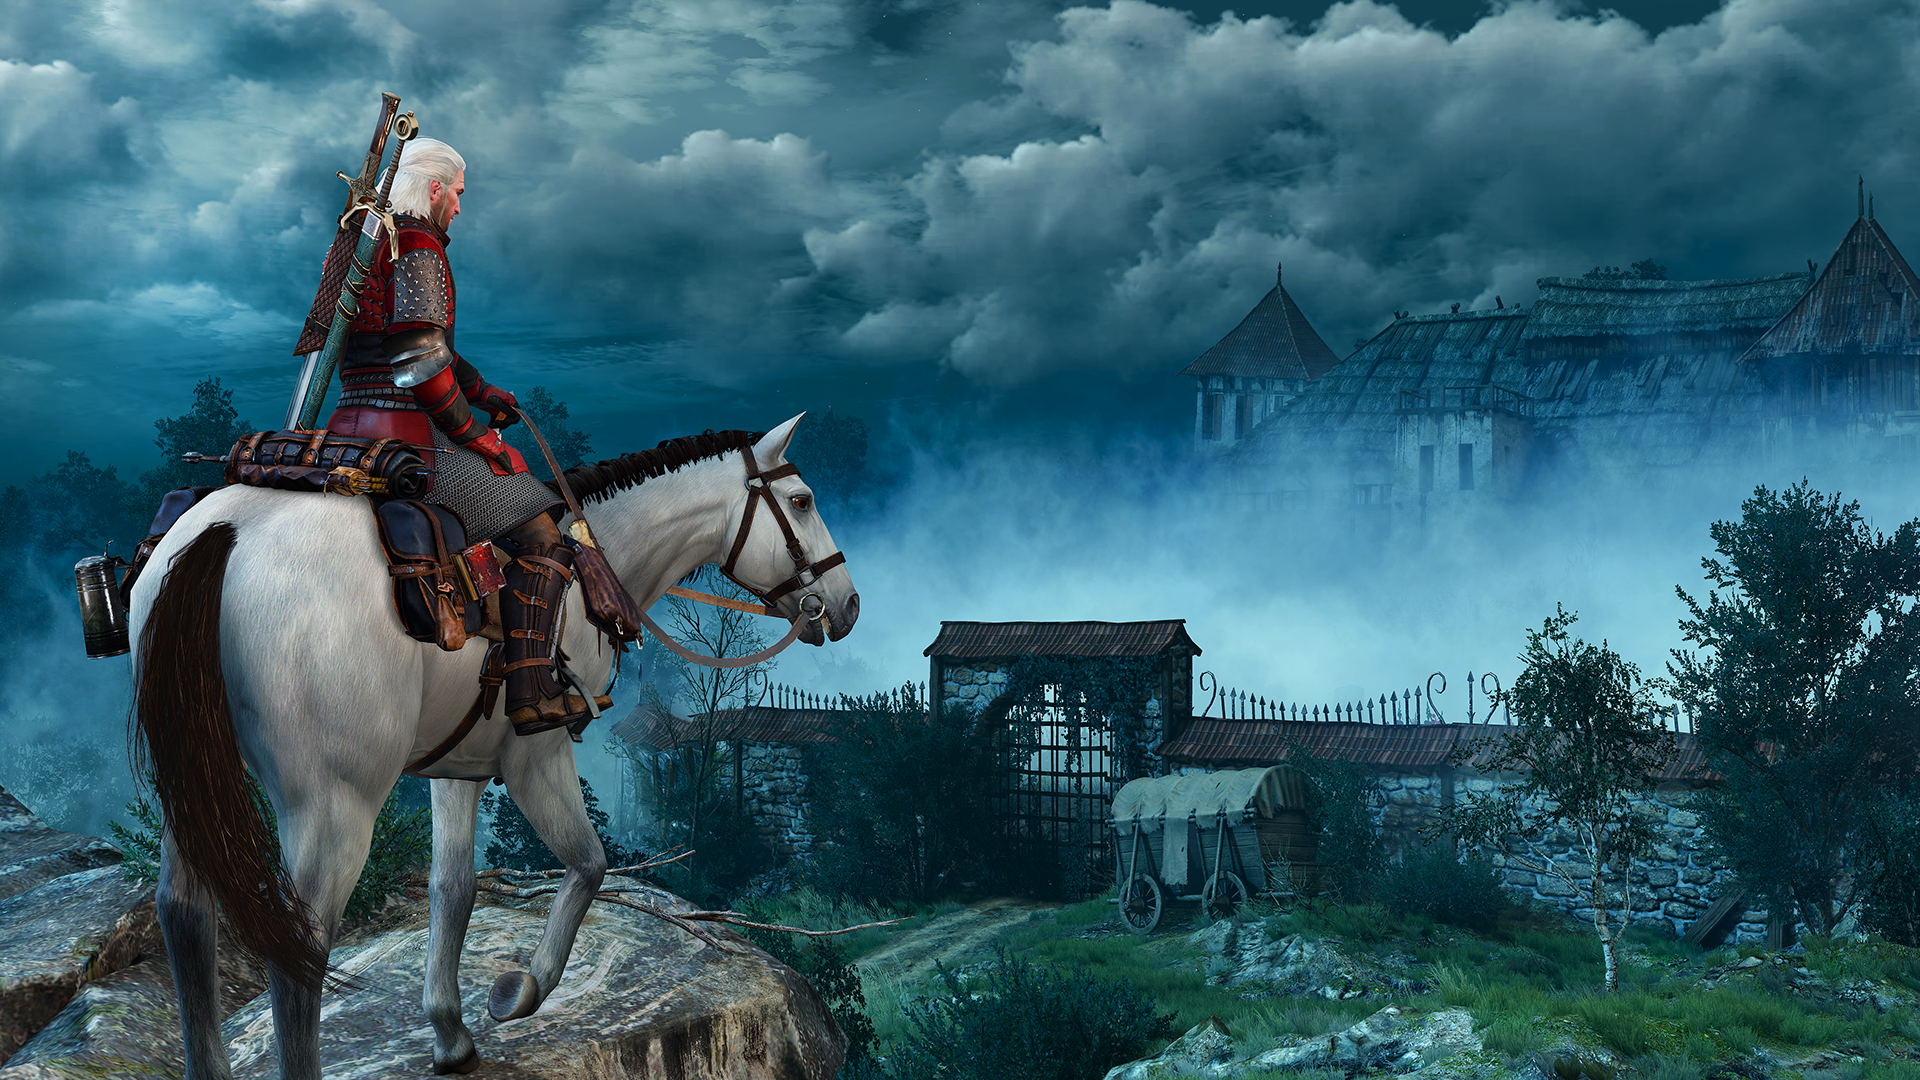 The Witcher The Witcher 3 Wild Hunt Geralt Of Rivia DLC Video Games The Witcher 3 Wild Hunt Hearts O 1920x1080